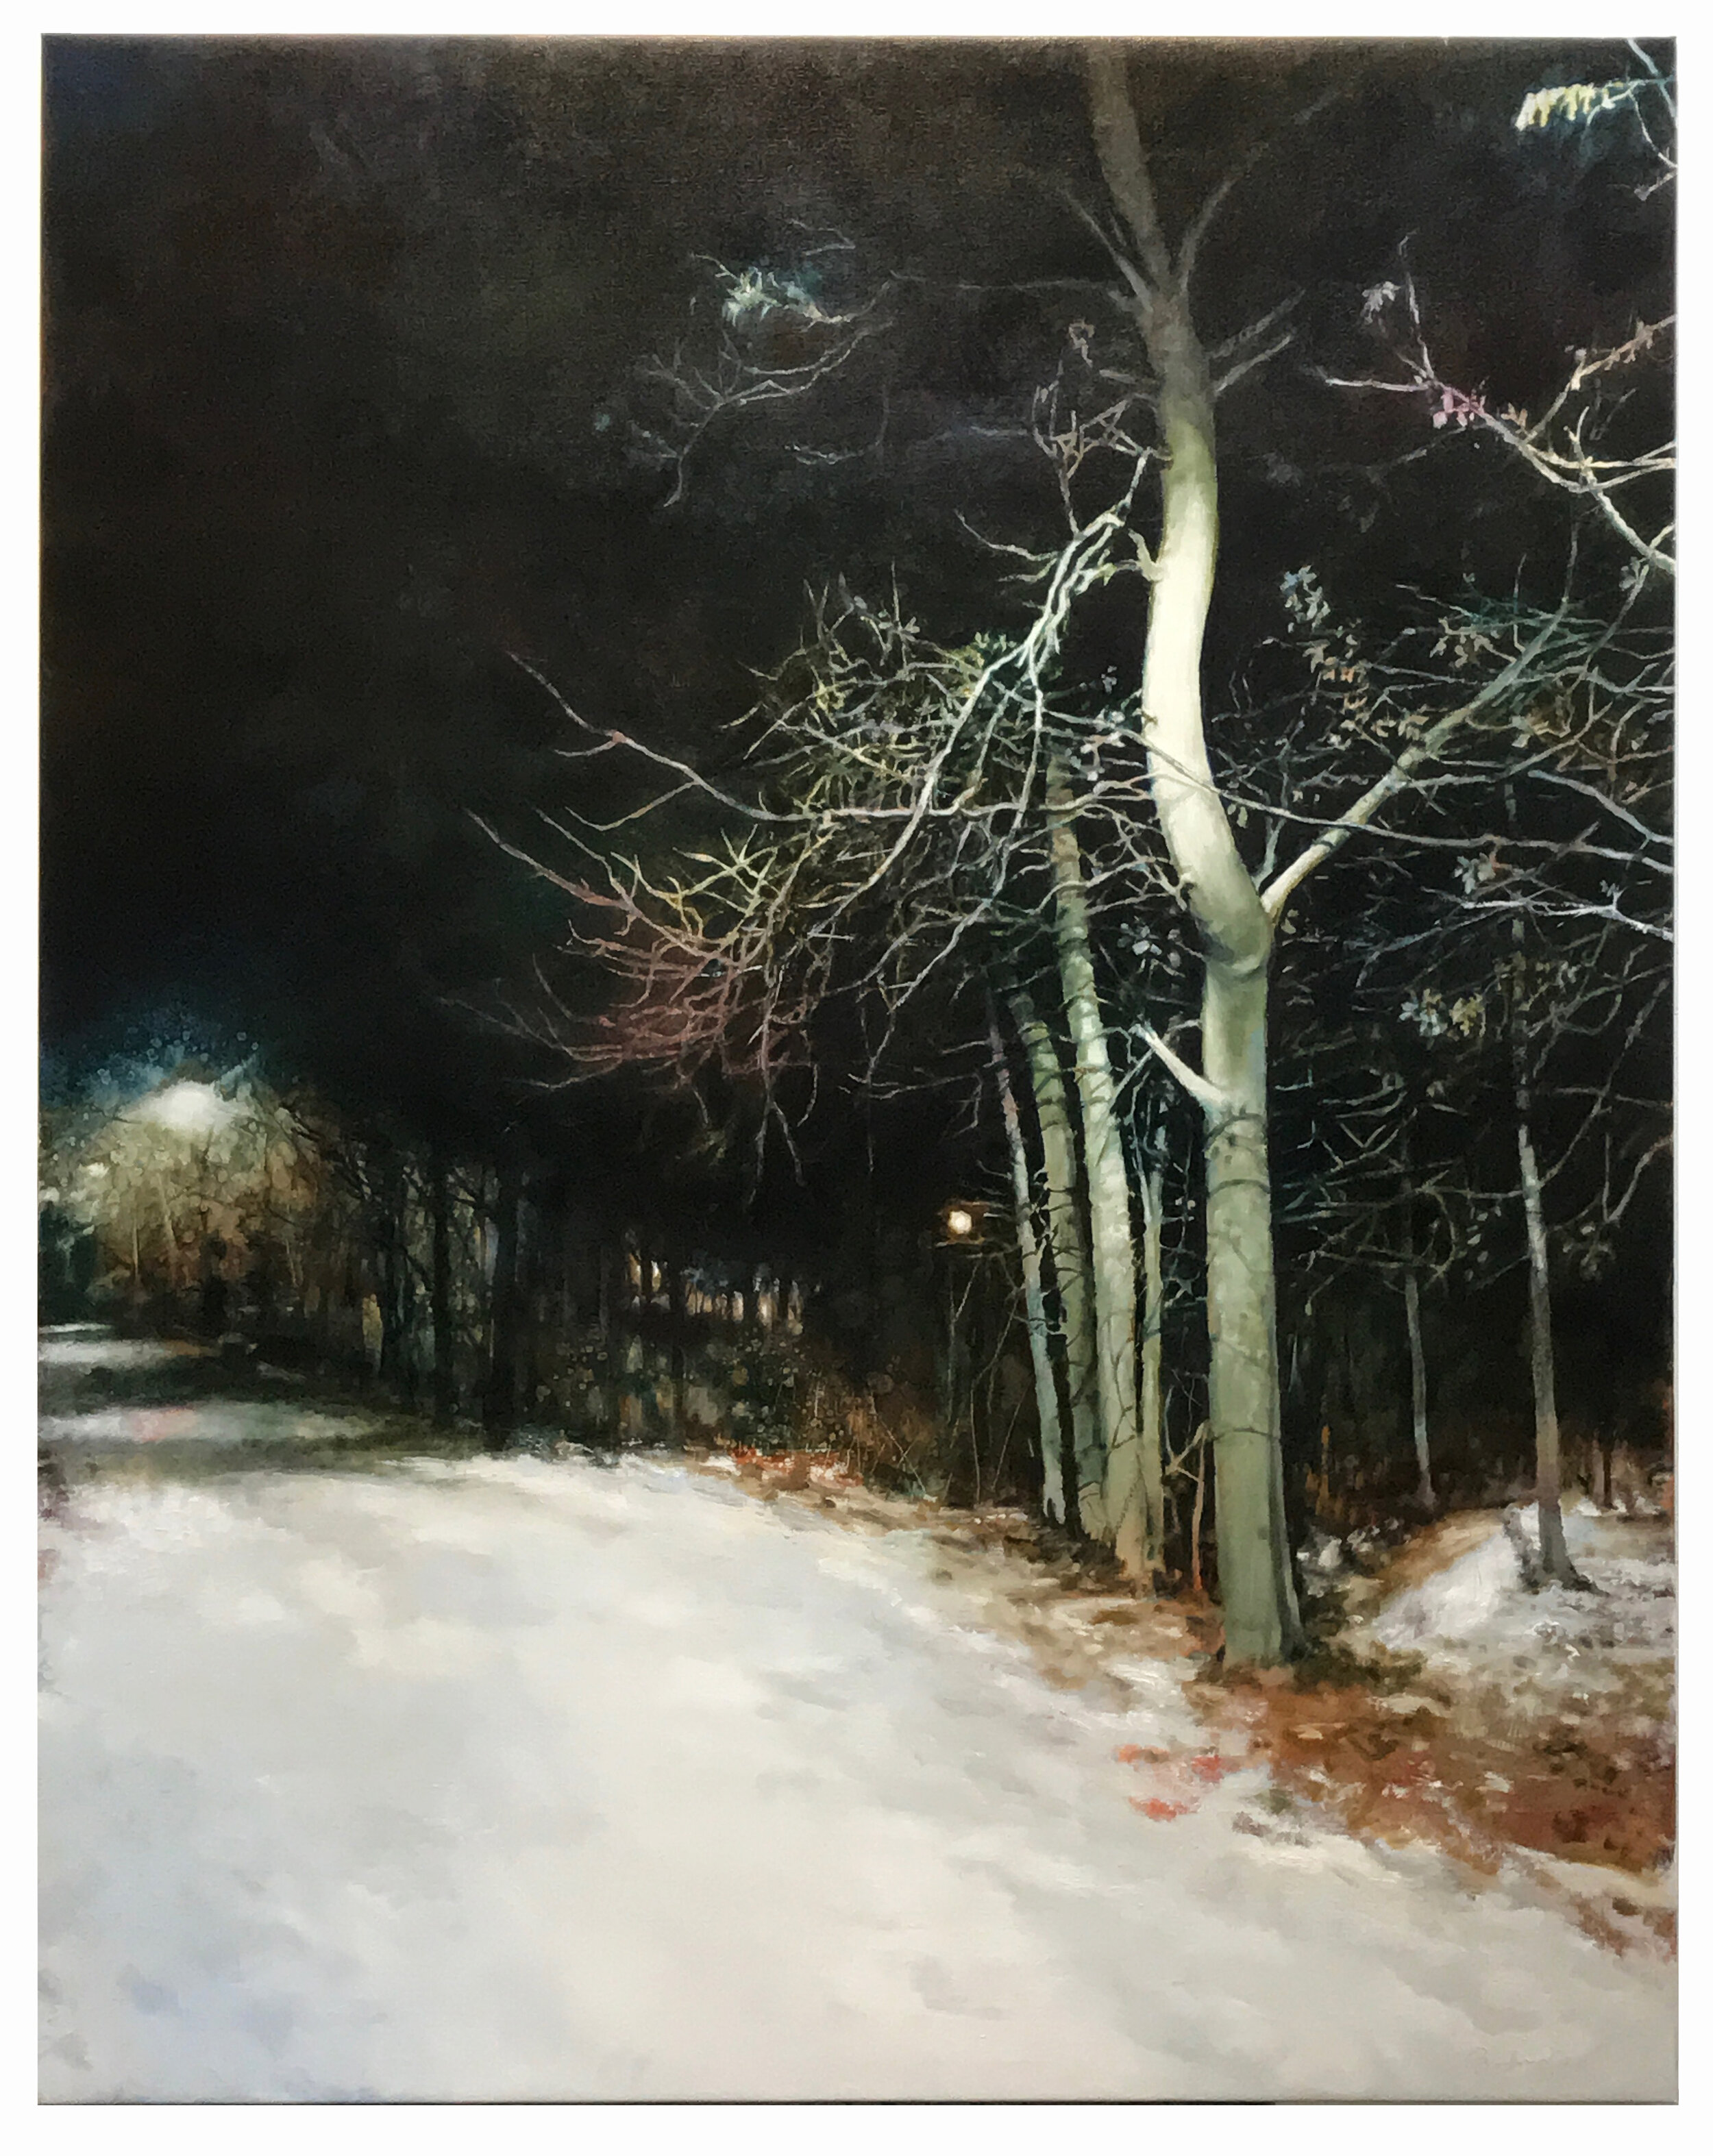  Winter 2 57 x 45 inches Oil on linen 2018 